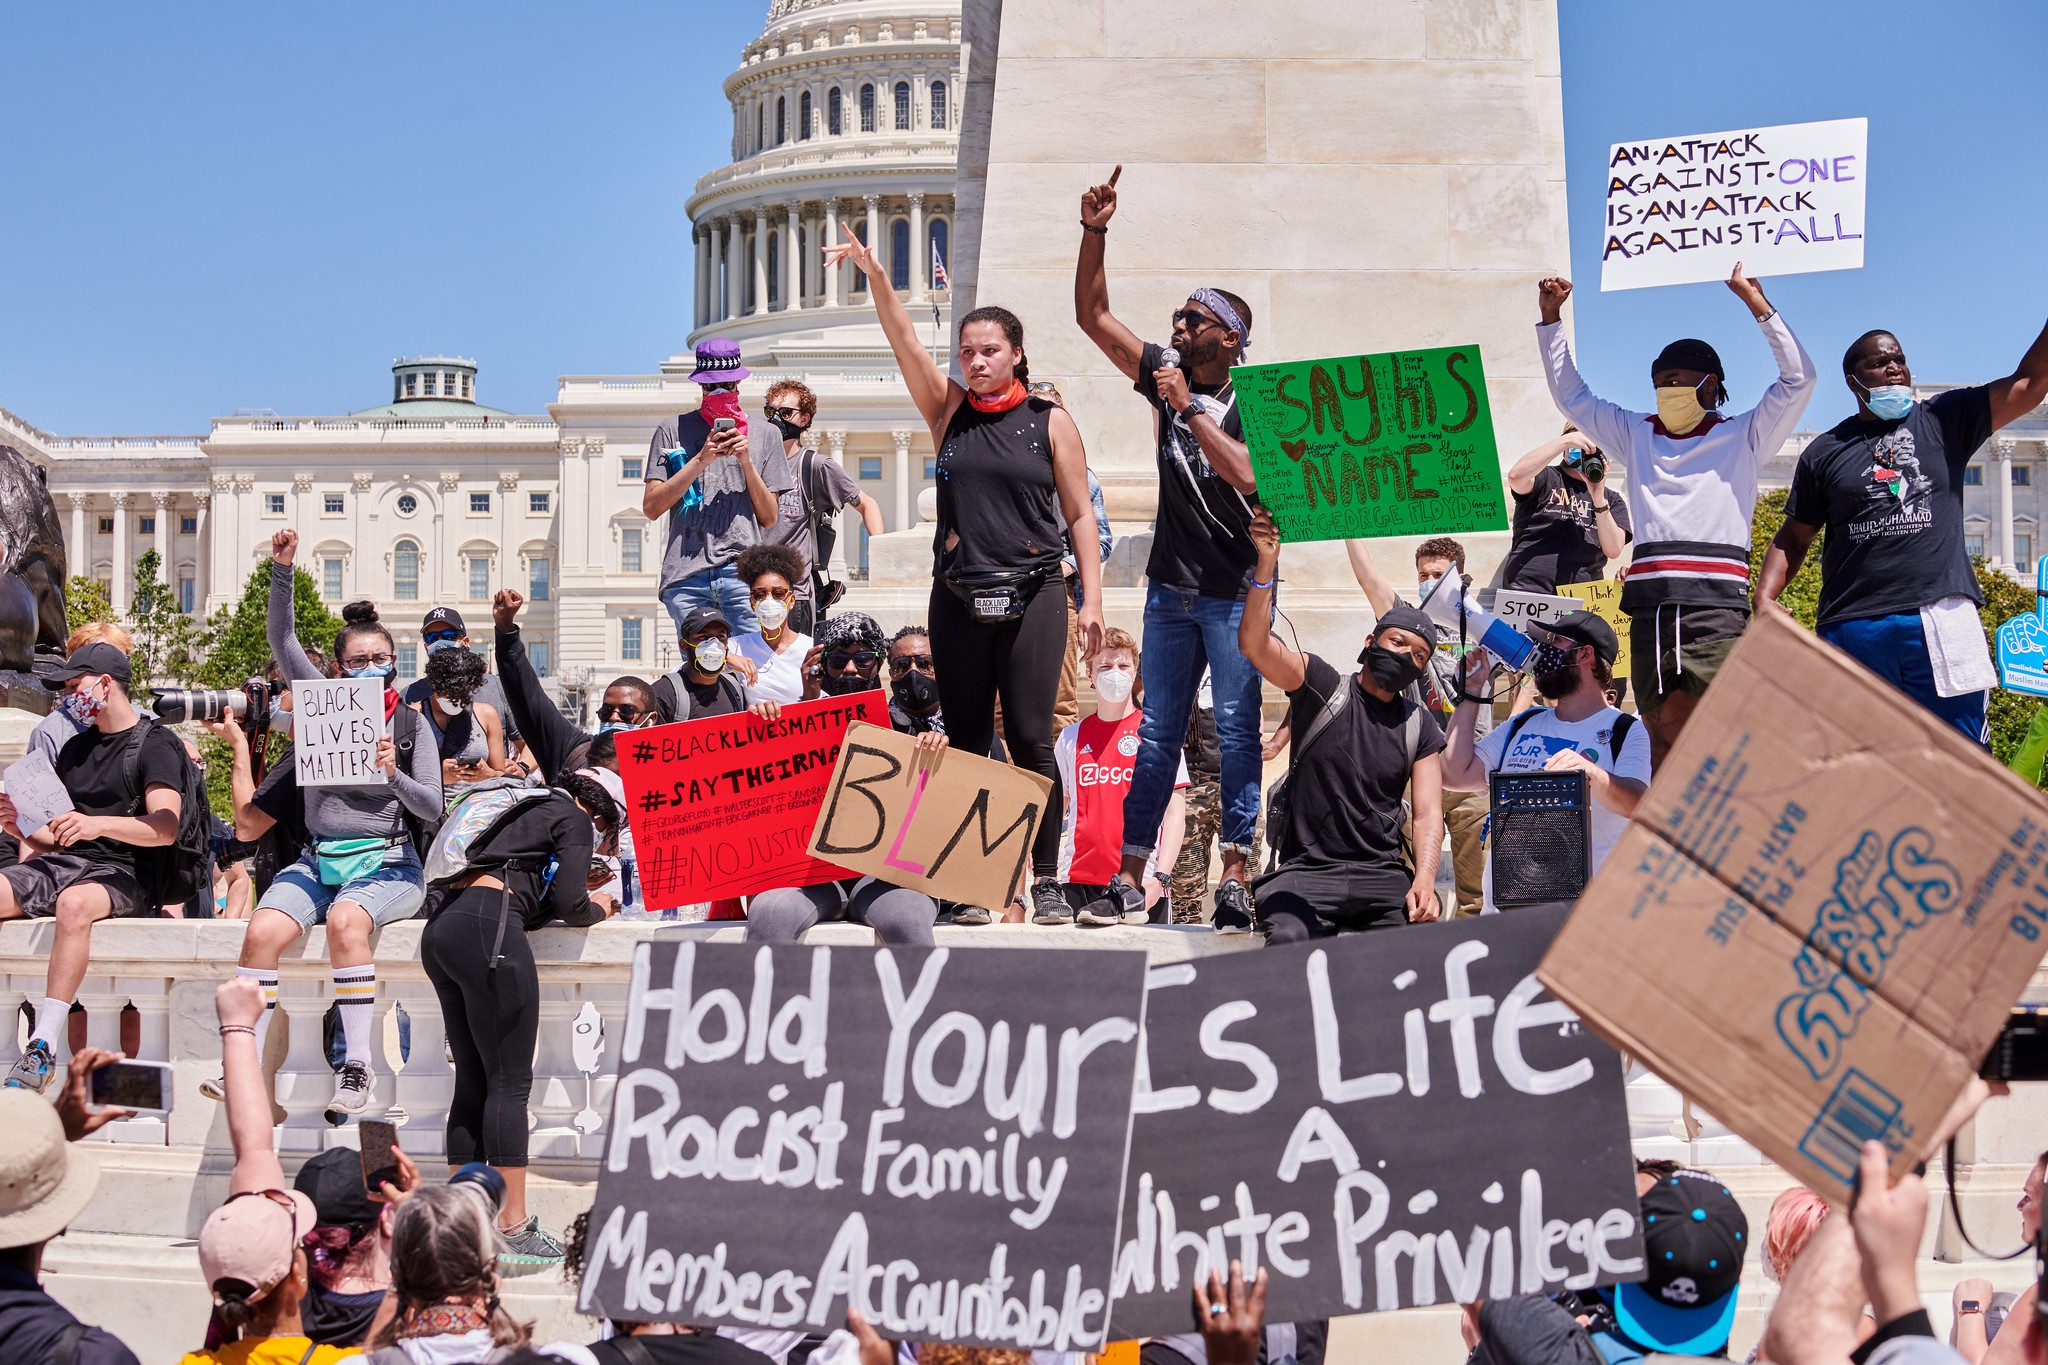 Dozens of young people, mostly Black, gather with Capitol Hill in the background, holding signs that read "Black Lives Matter." Two stand in the middle with arms upraised as if speaking to the crowd.